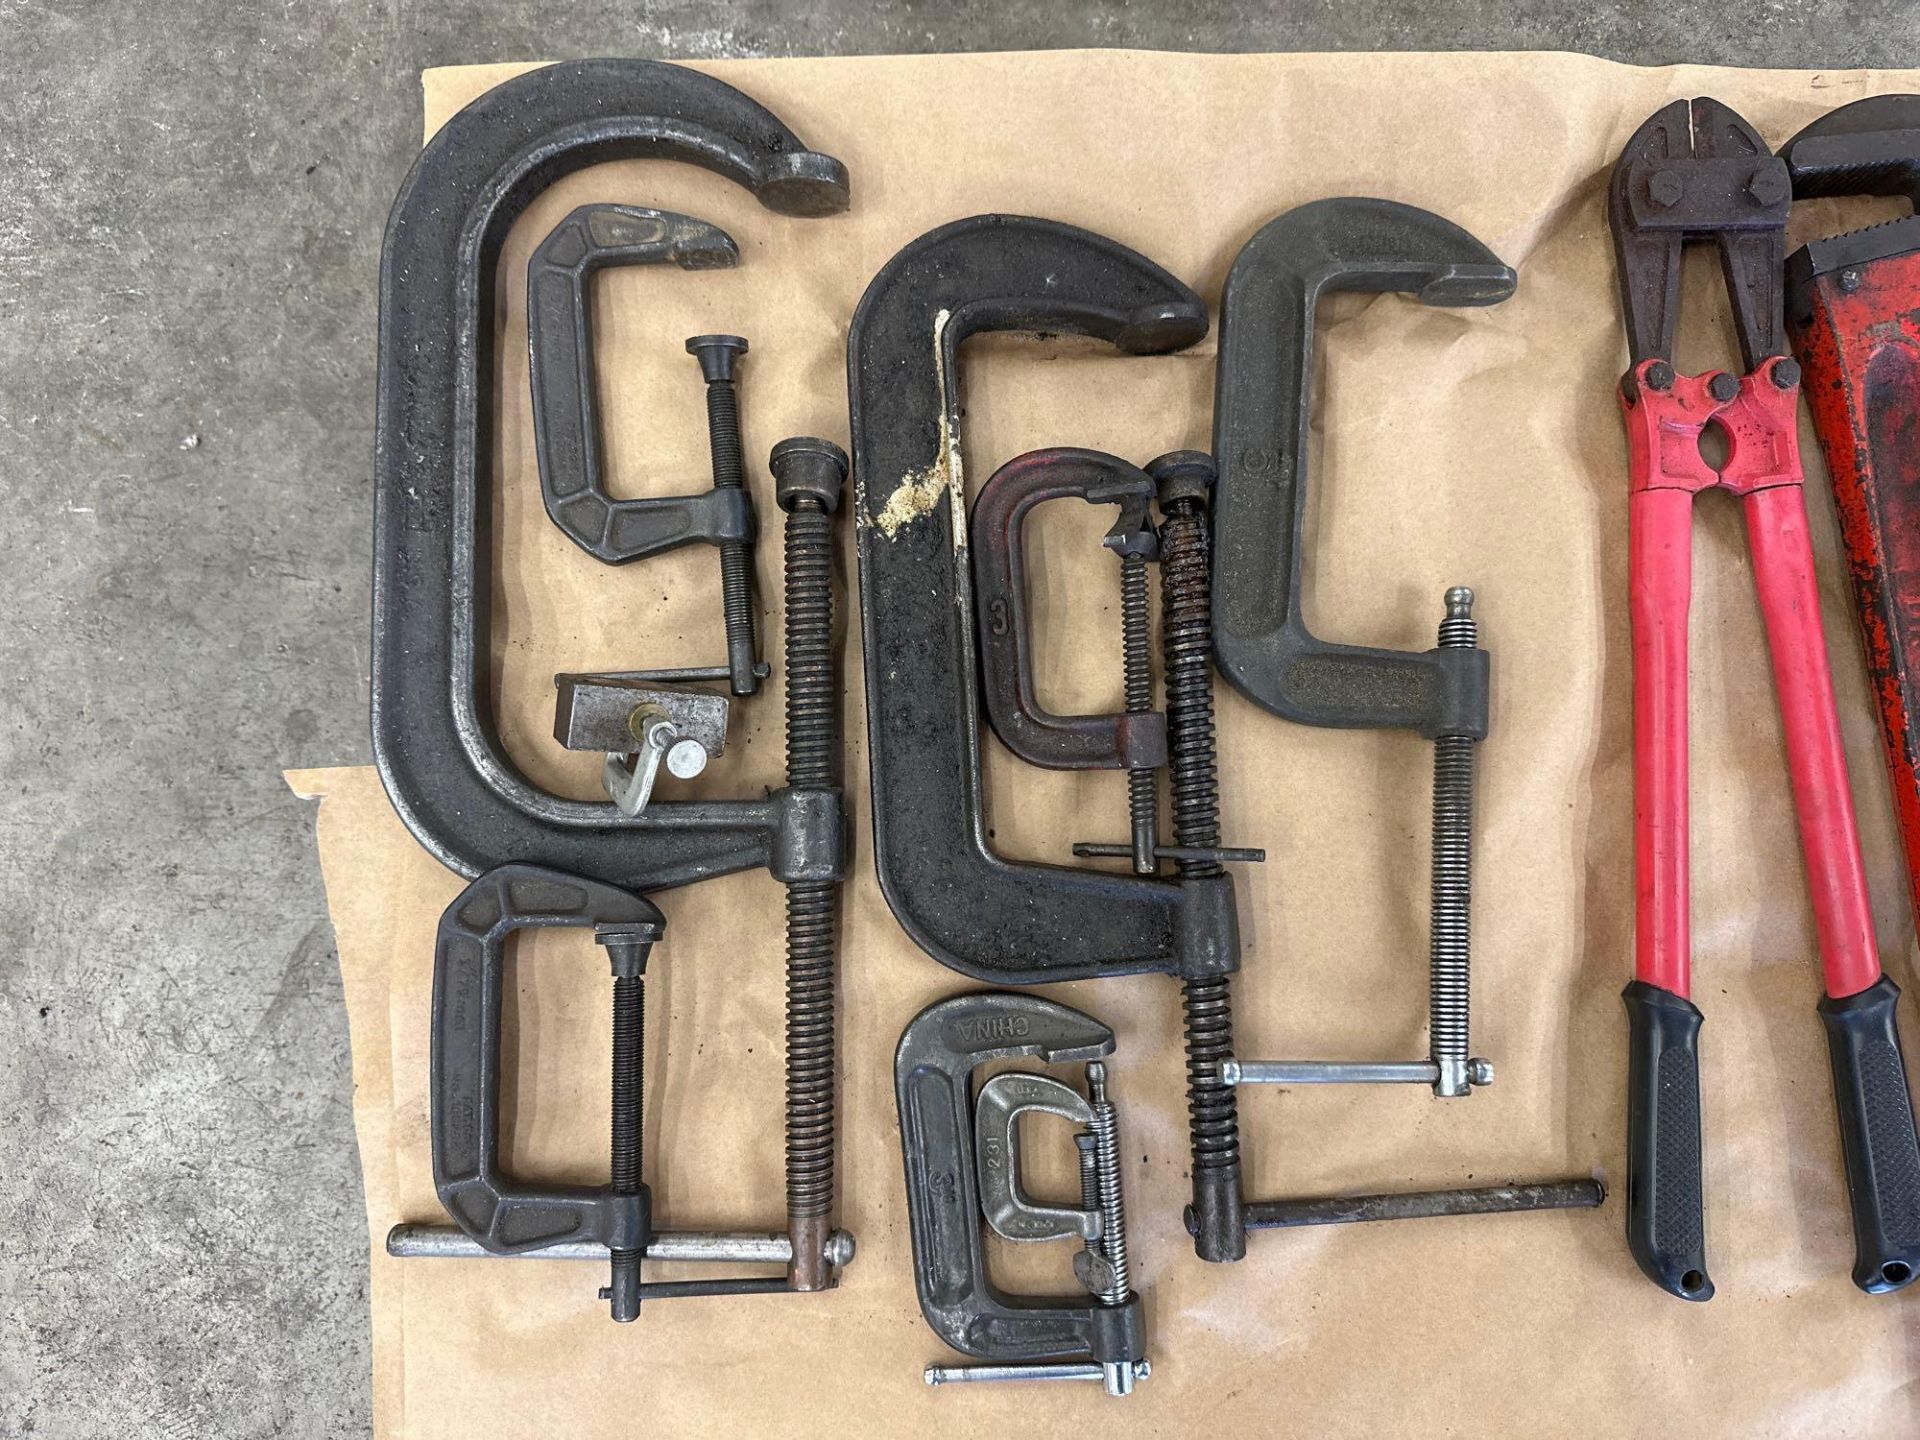 Lot of C - Clamps and Wrenches - Image 2 of 2